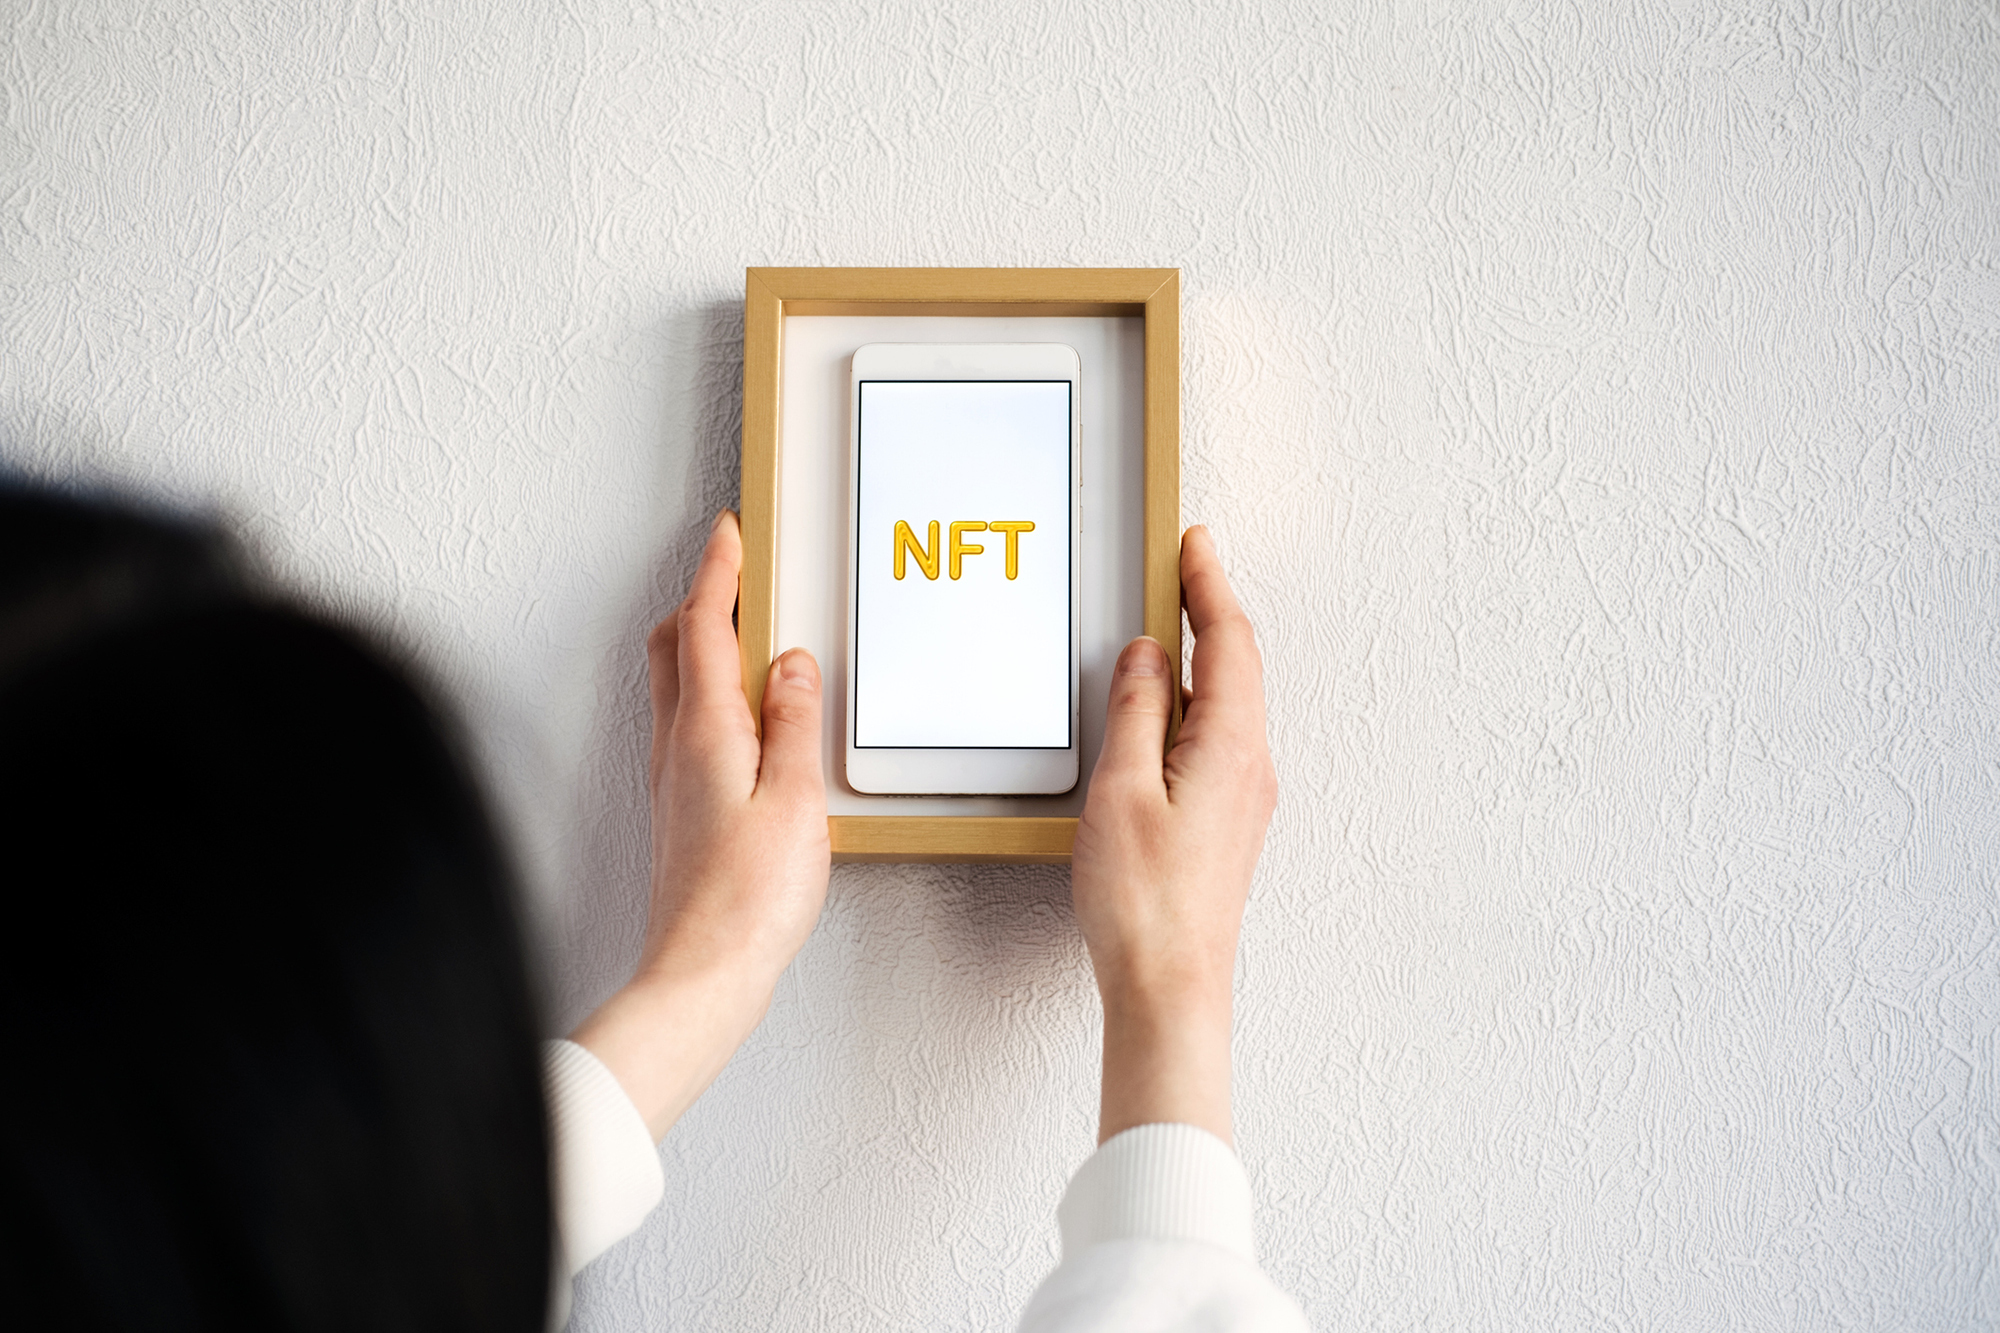 Picture frame of a phone with the letters 'NFT' written on it.